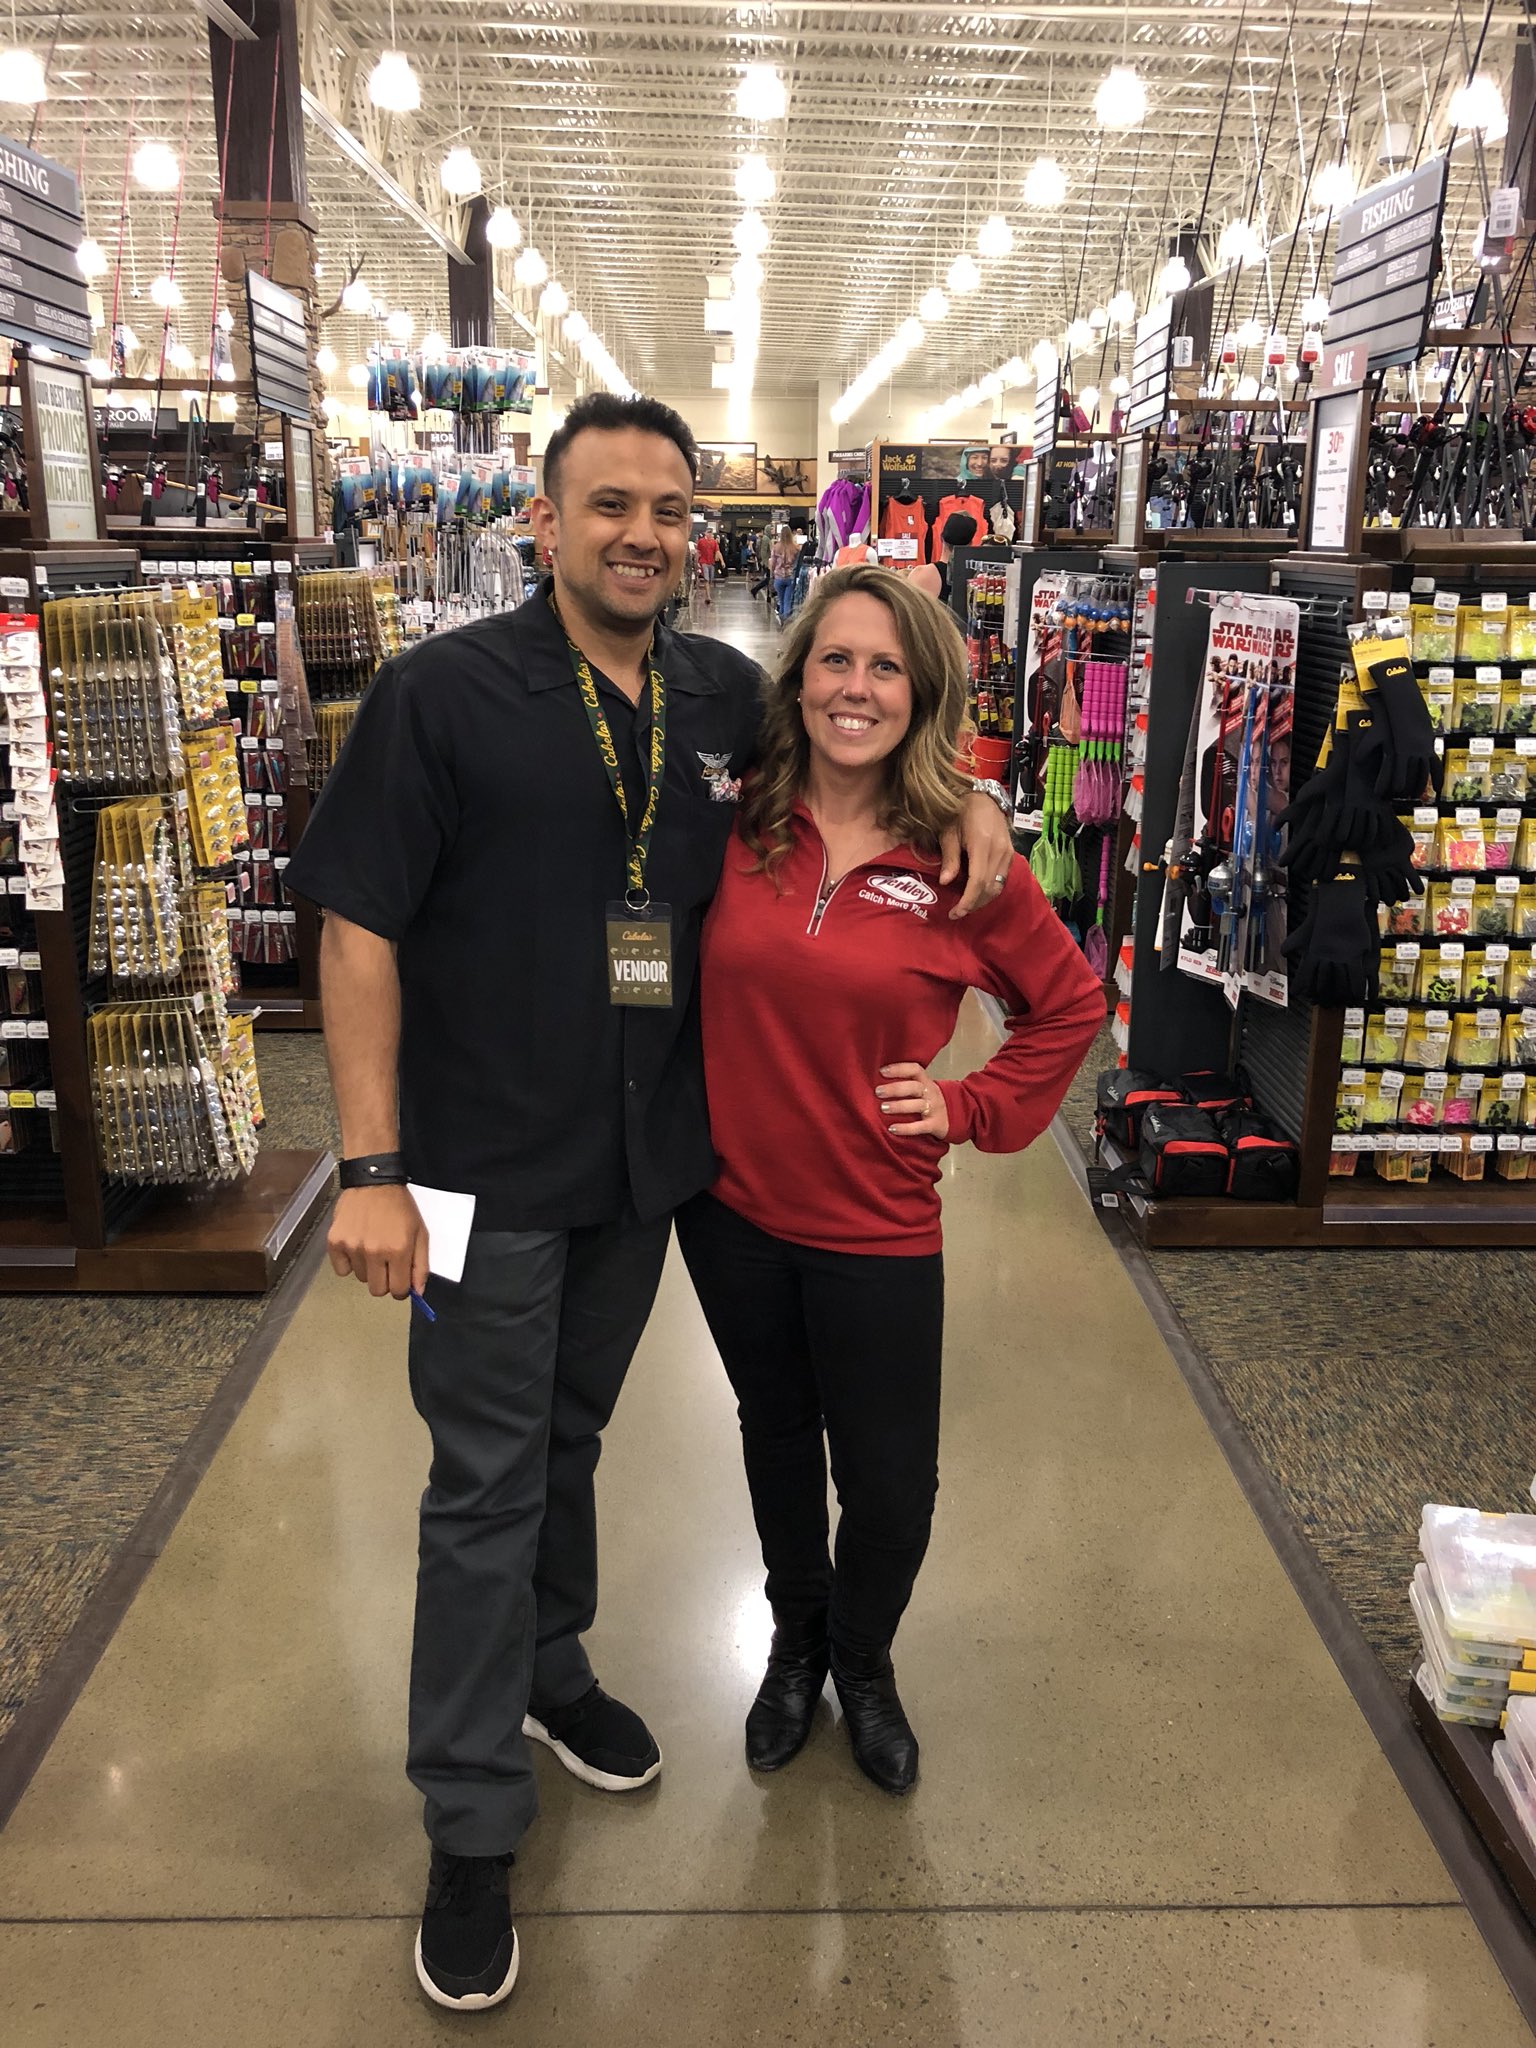 cara carmichael on X: Had a great time hanging out at Cabela's on  Saturday. I will be back this Saturday 9:00- 4:00! 👍🎣 @cabelascanada @ Cabelas @BerkleyFishing @SkollGear @canada_live @onwomenanglers #fishing # cabelas #berkley #